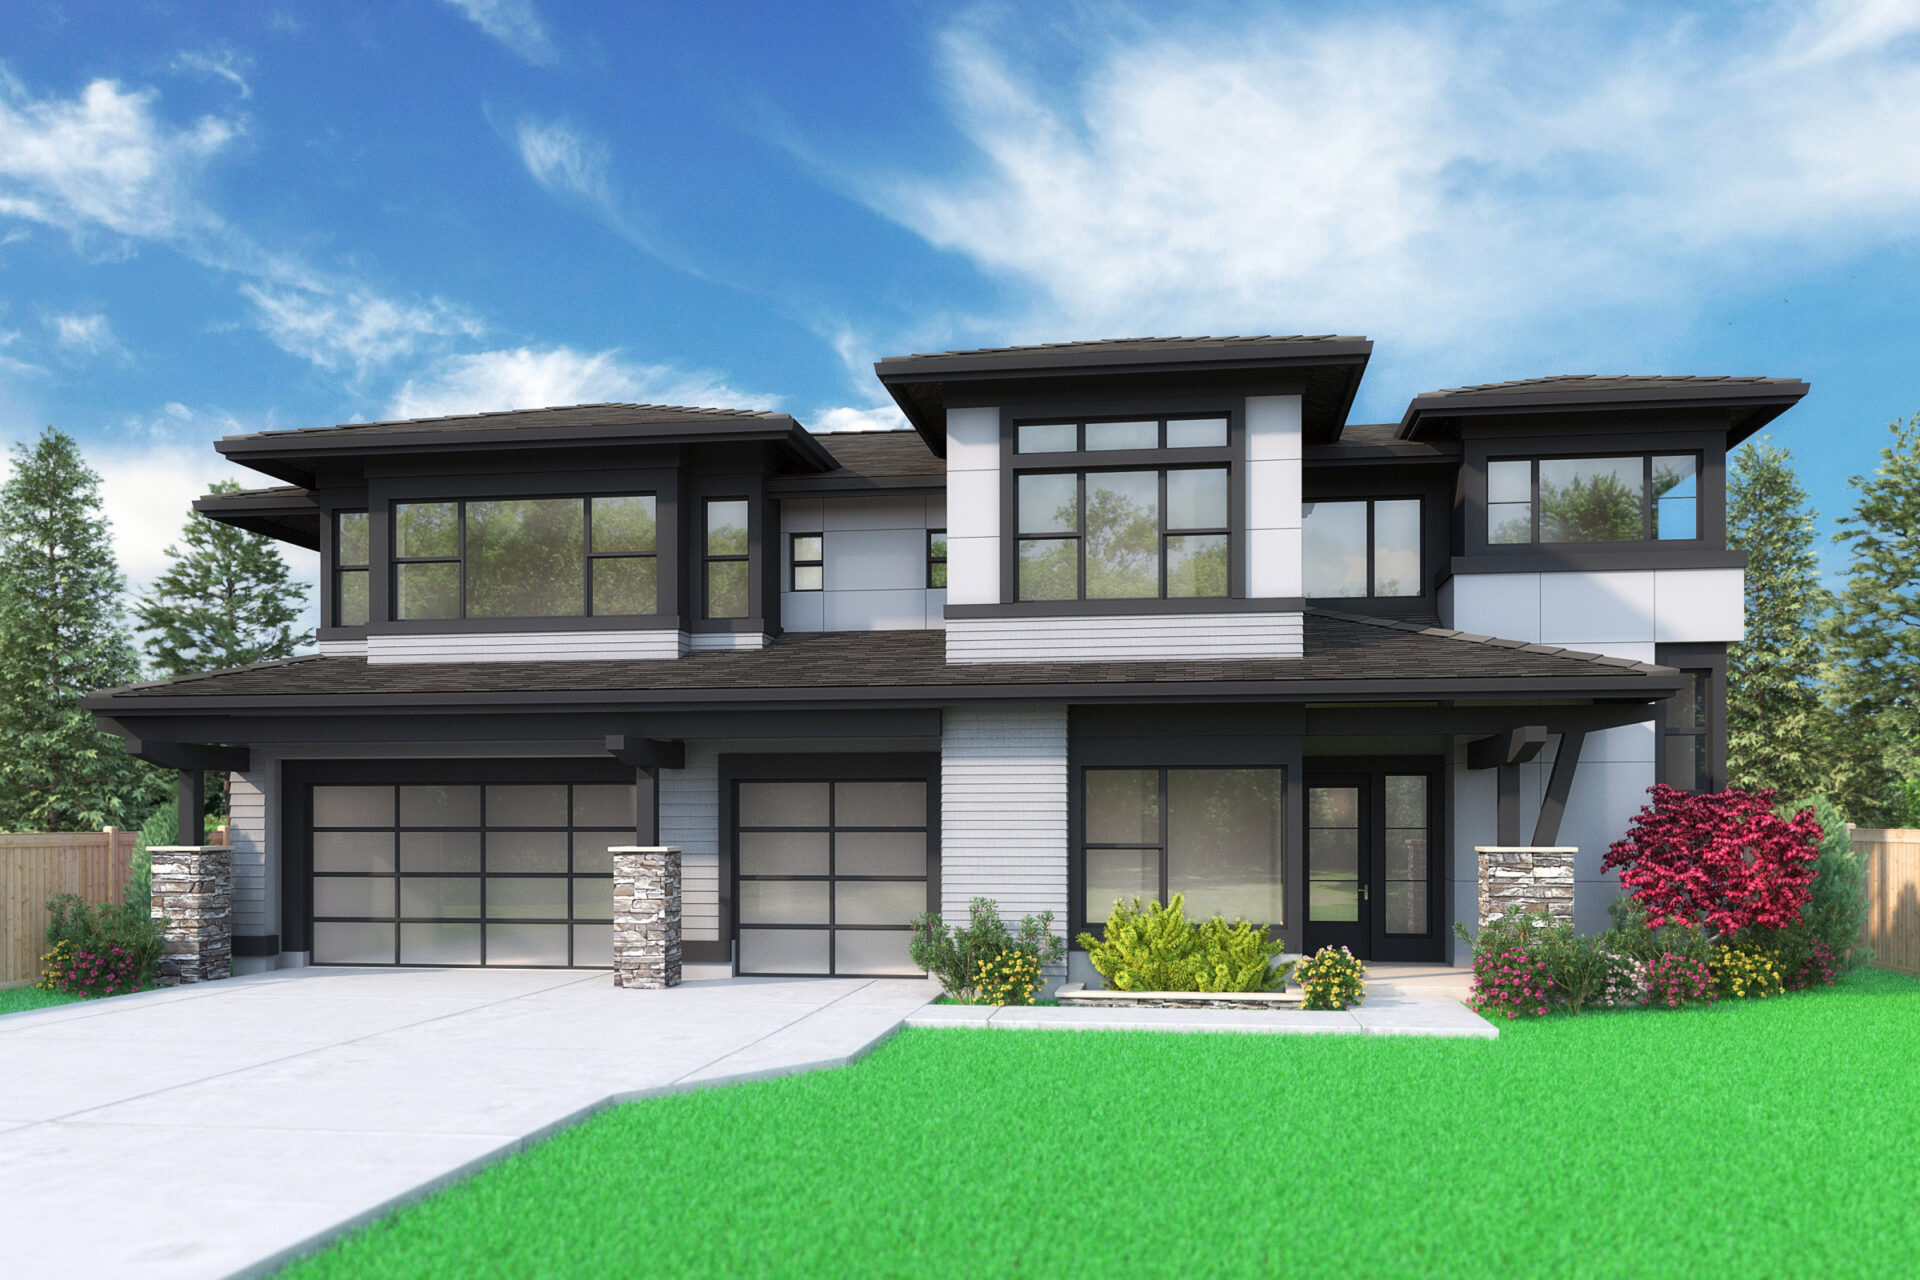 View our new luxury home construction on 16530 SE 29th St, in Bellevue, WA from MN Custom Homes